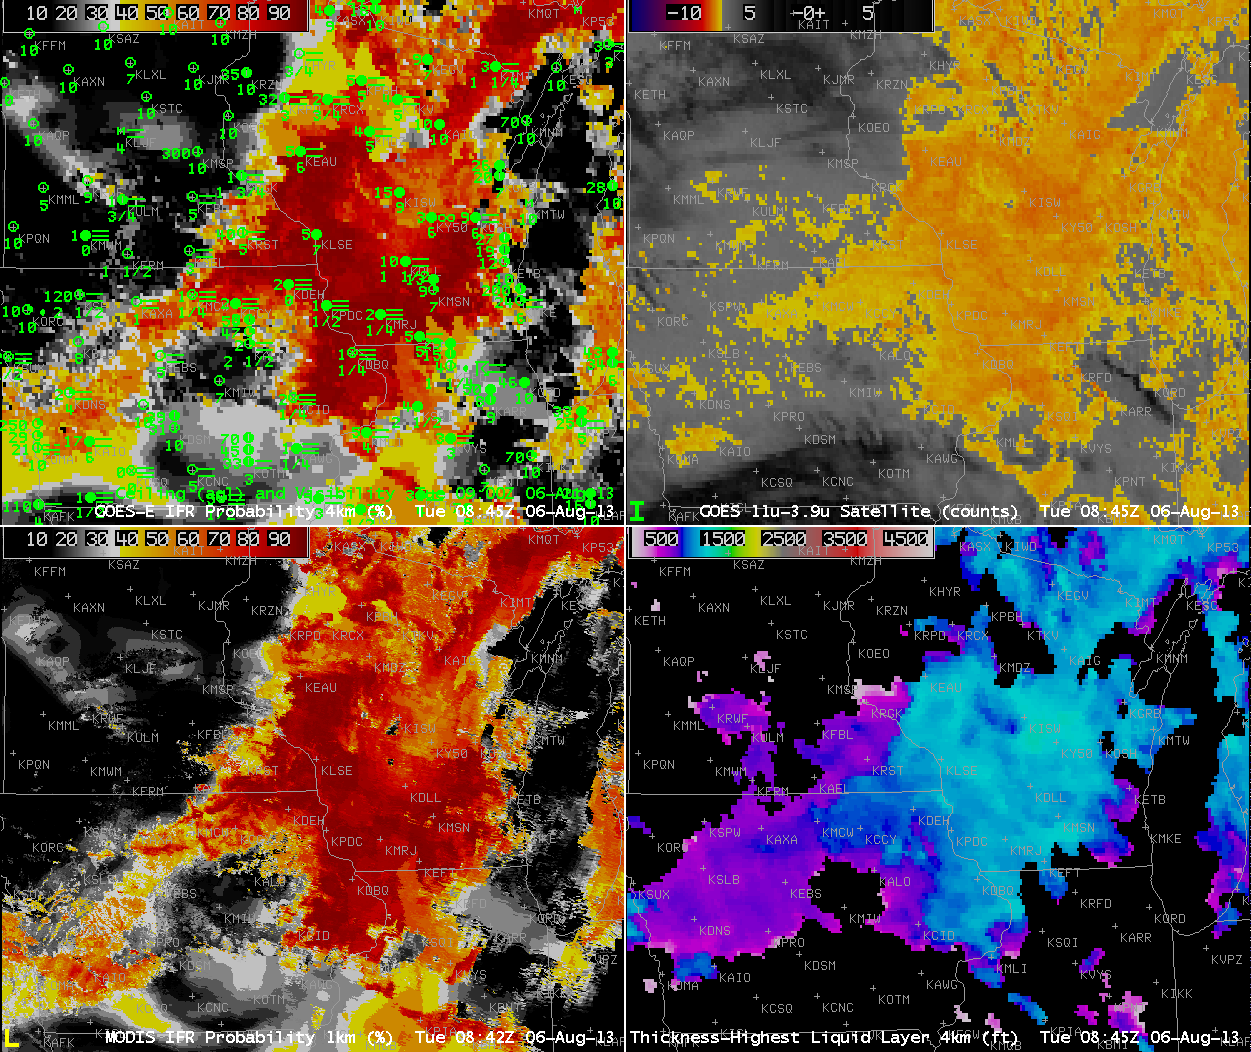 GOES-based GOES-R IFR Probabilities (Upper Left), GOES-East Brightness Temperature Difference (Upper Right, 10.7 µm - 3.9 µm), MODIS-based GOES-R IFR Probabilities (Lower Left), GOES-based GOES-R Cloud Thickness (Lower Right) (click image to play animation)